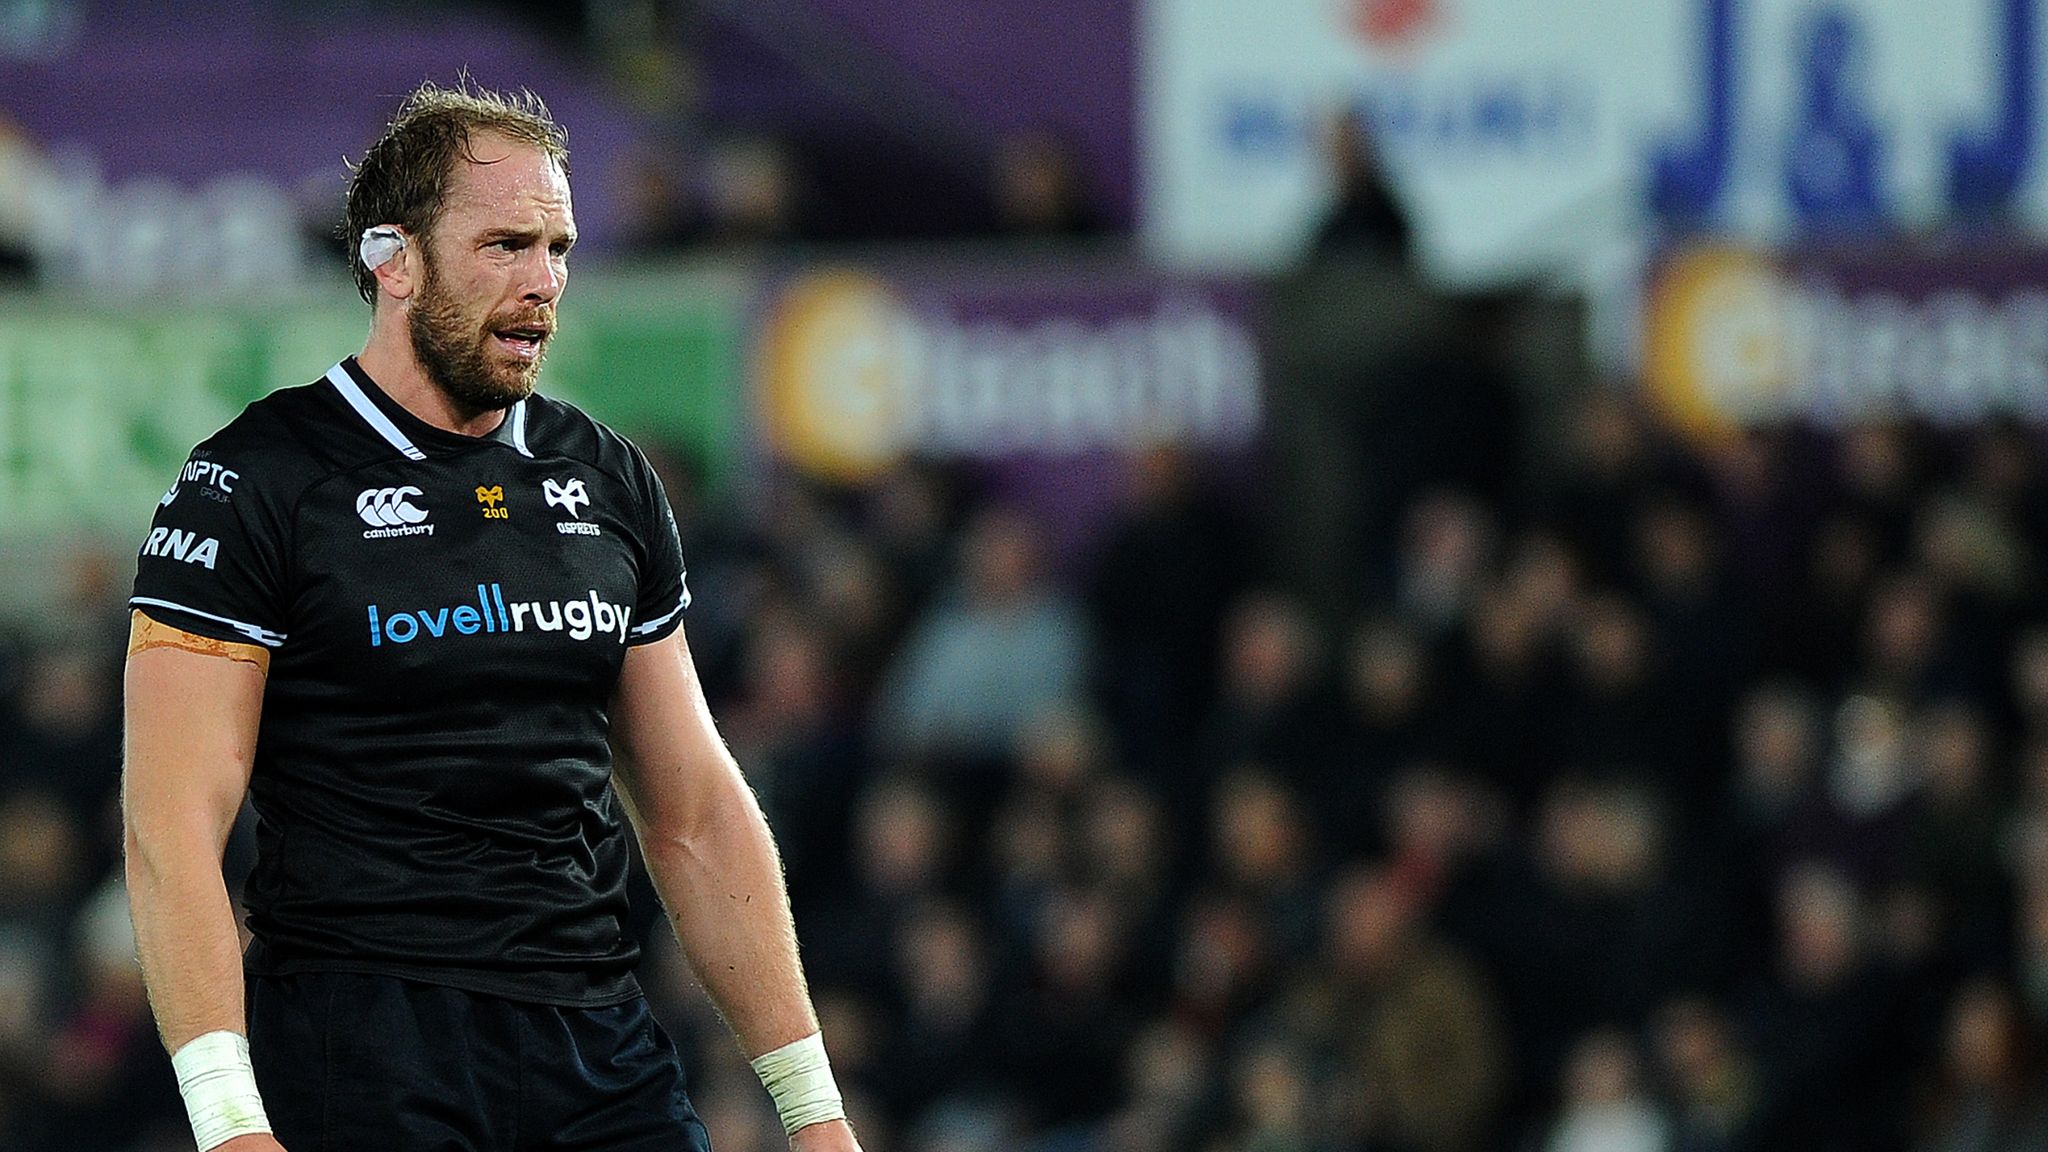 Alun Wyn Jones signs new national dual contract with Welsh Rugby Union and Ospreys Rugby Union News Sky Sports